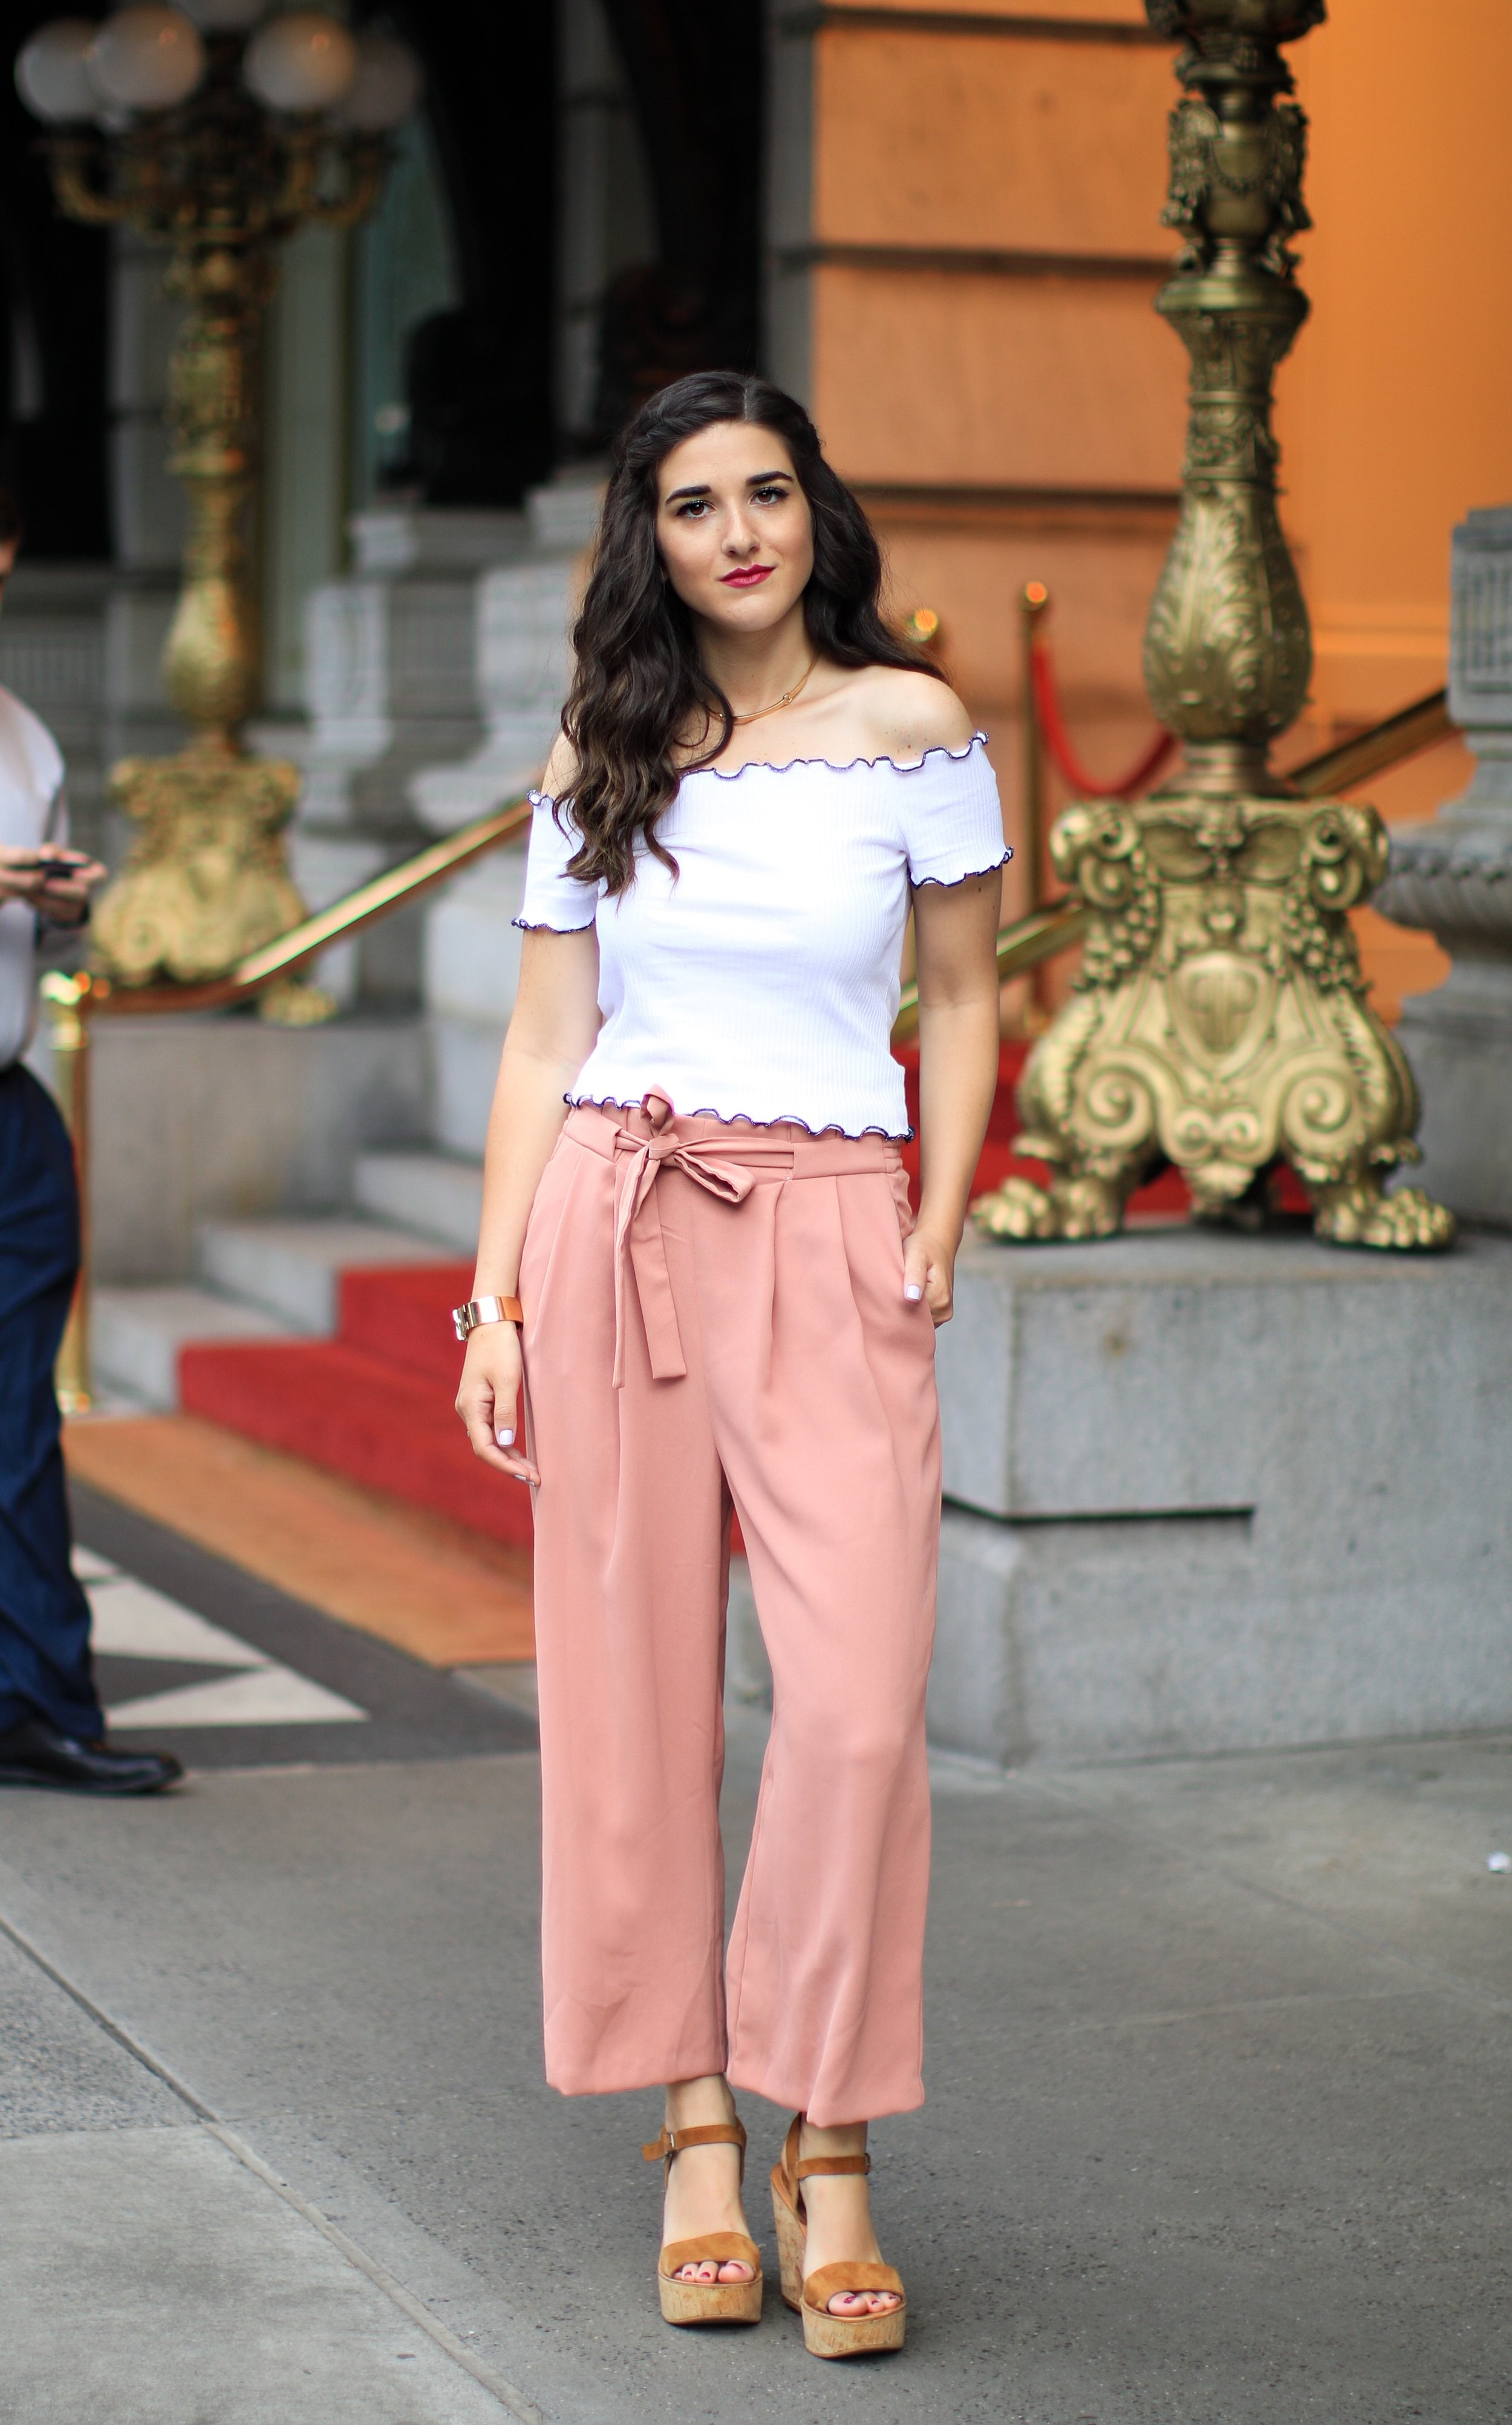 Pink Palazzo Pants + Ruffled Crop Top The Shockingly Hardest Thing About Planning A Wedding Esther Santer Fashion Blog NYC Street Style Blogger Outfit OOTD Trendy Crop Top Ruffles Trousers Shoes Wedges Dolce Vita Zara Feminine Henri Bendel  Jewelry.JPG